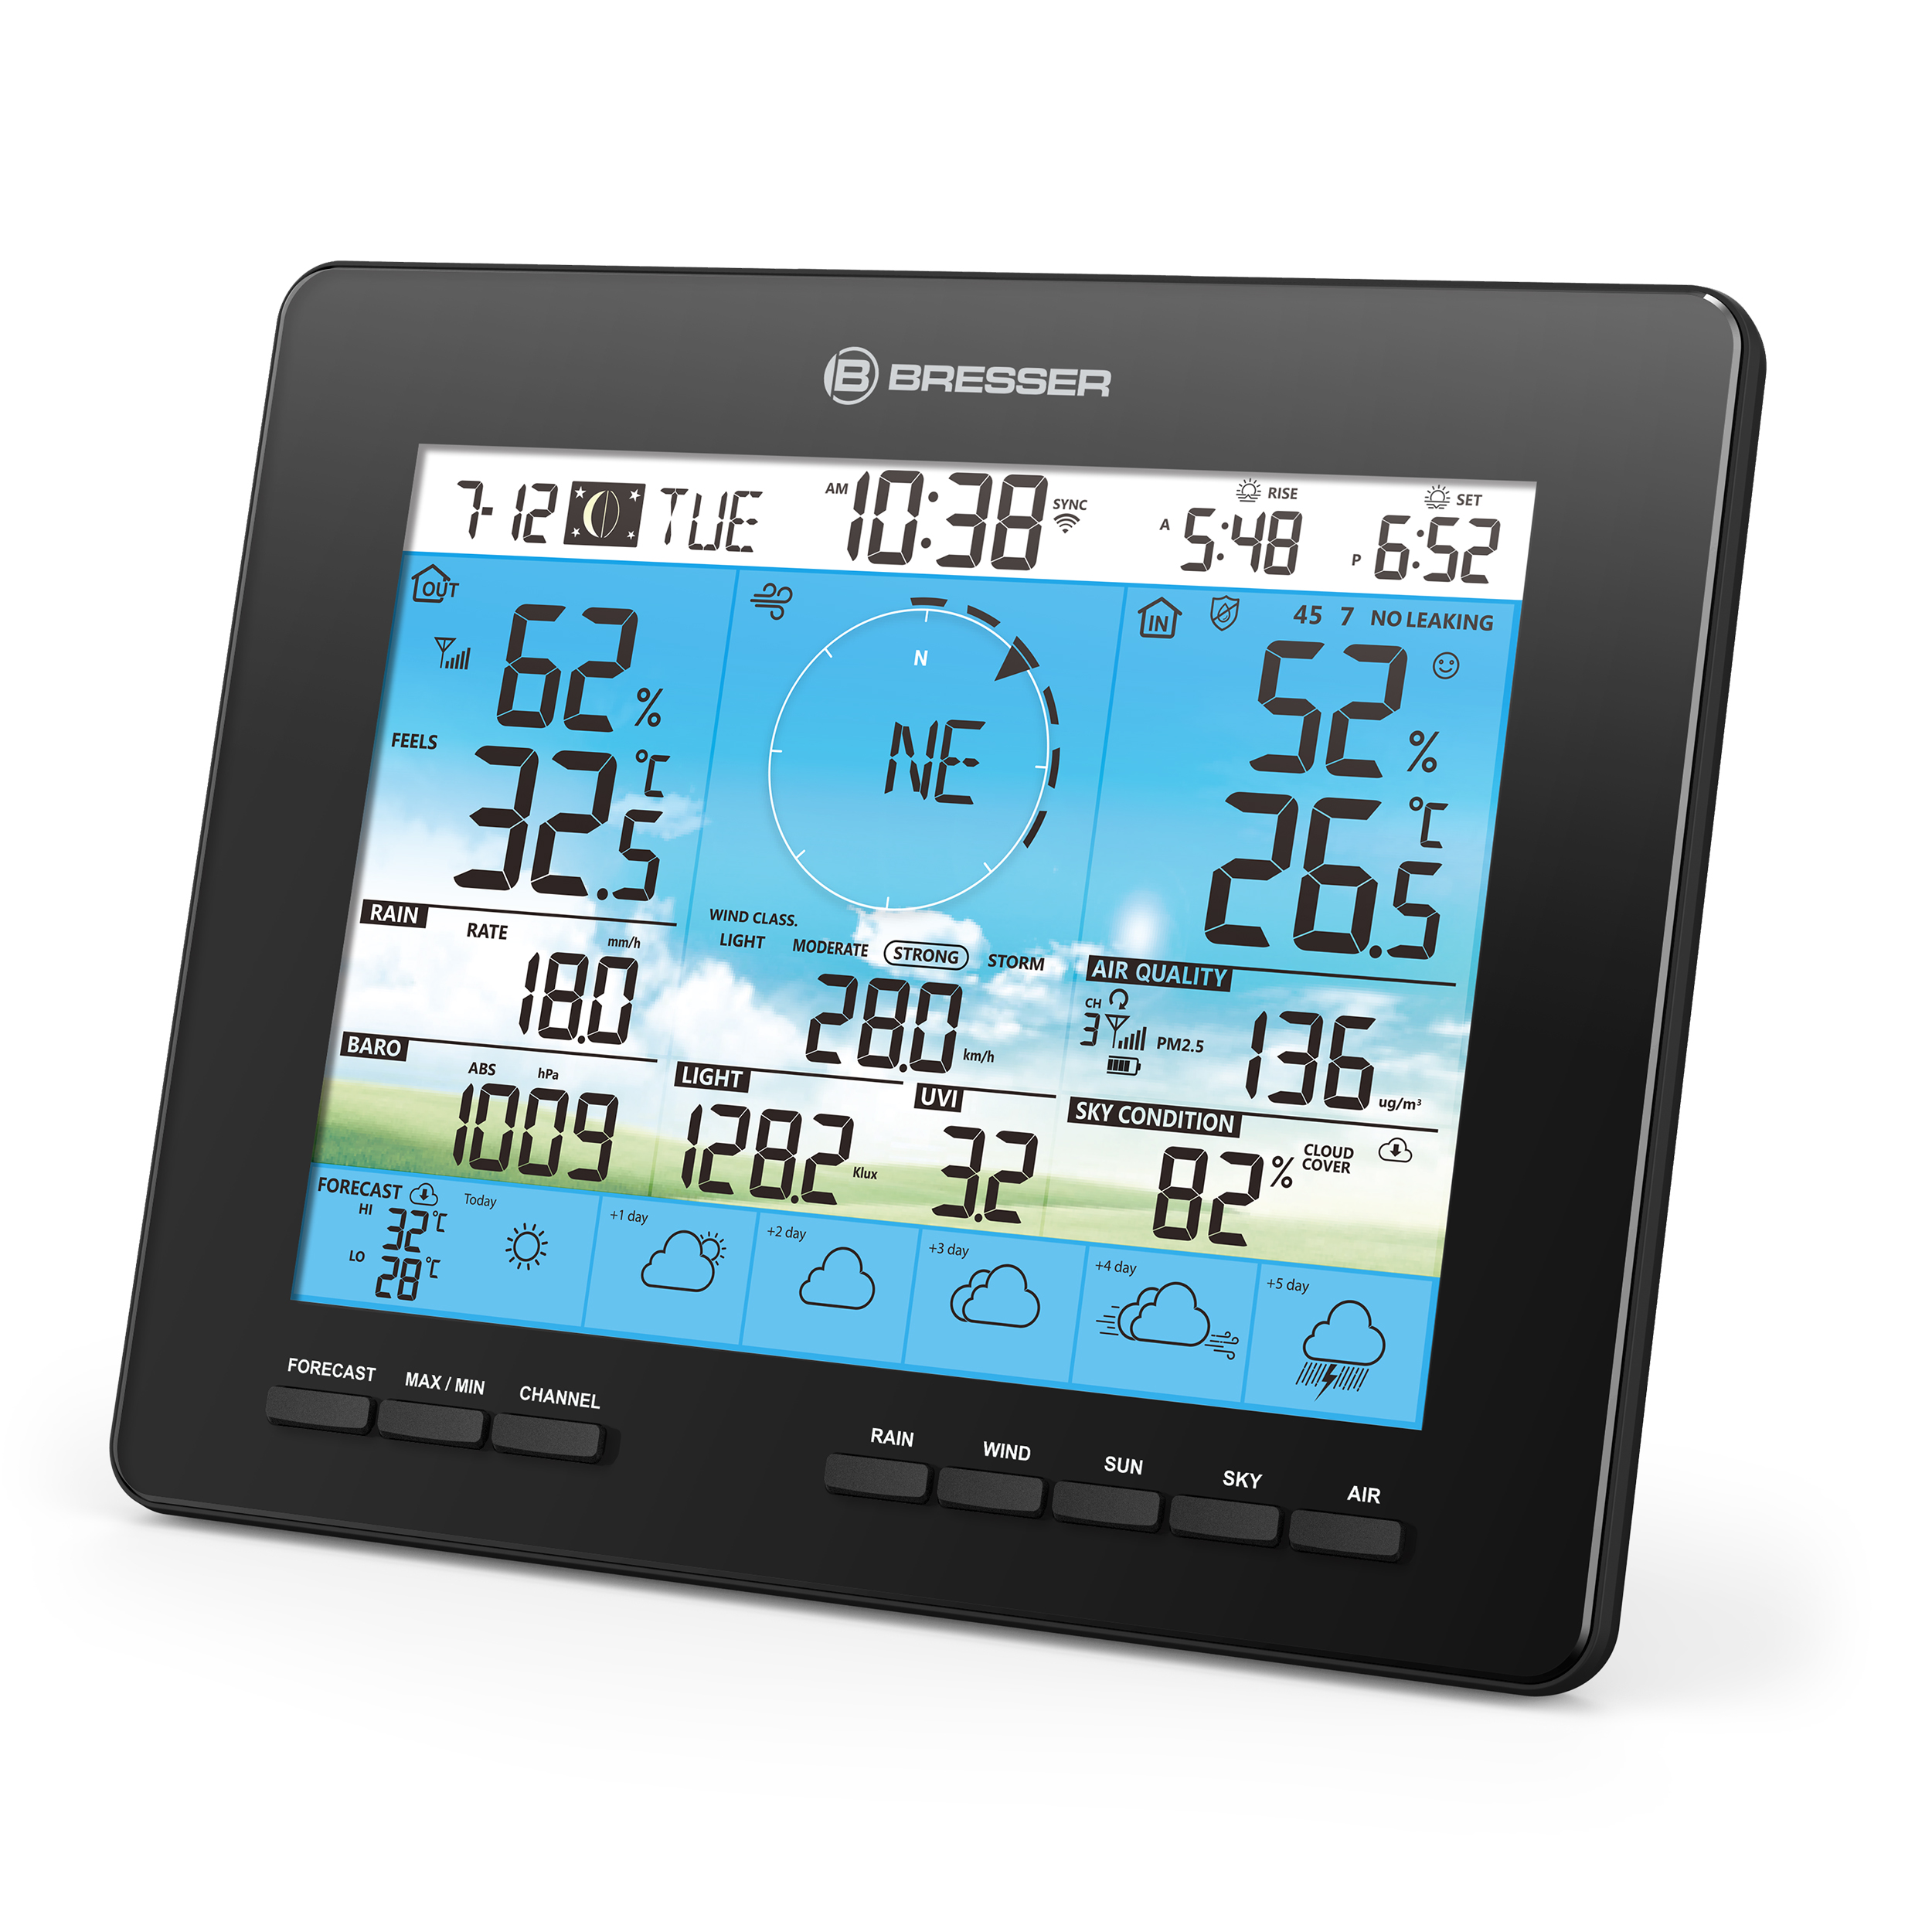 BRESSER 7-in-1 Solar 6-Day 4CAST PRO Wi-Fi Weather Station